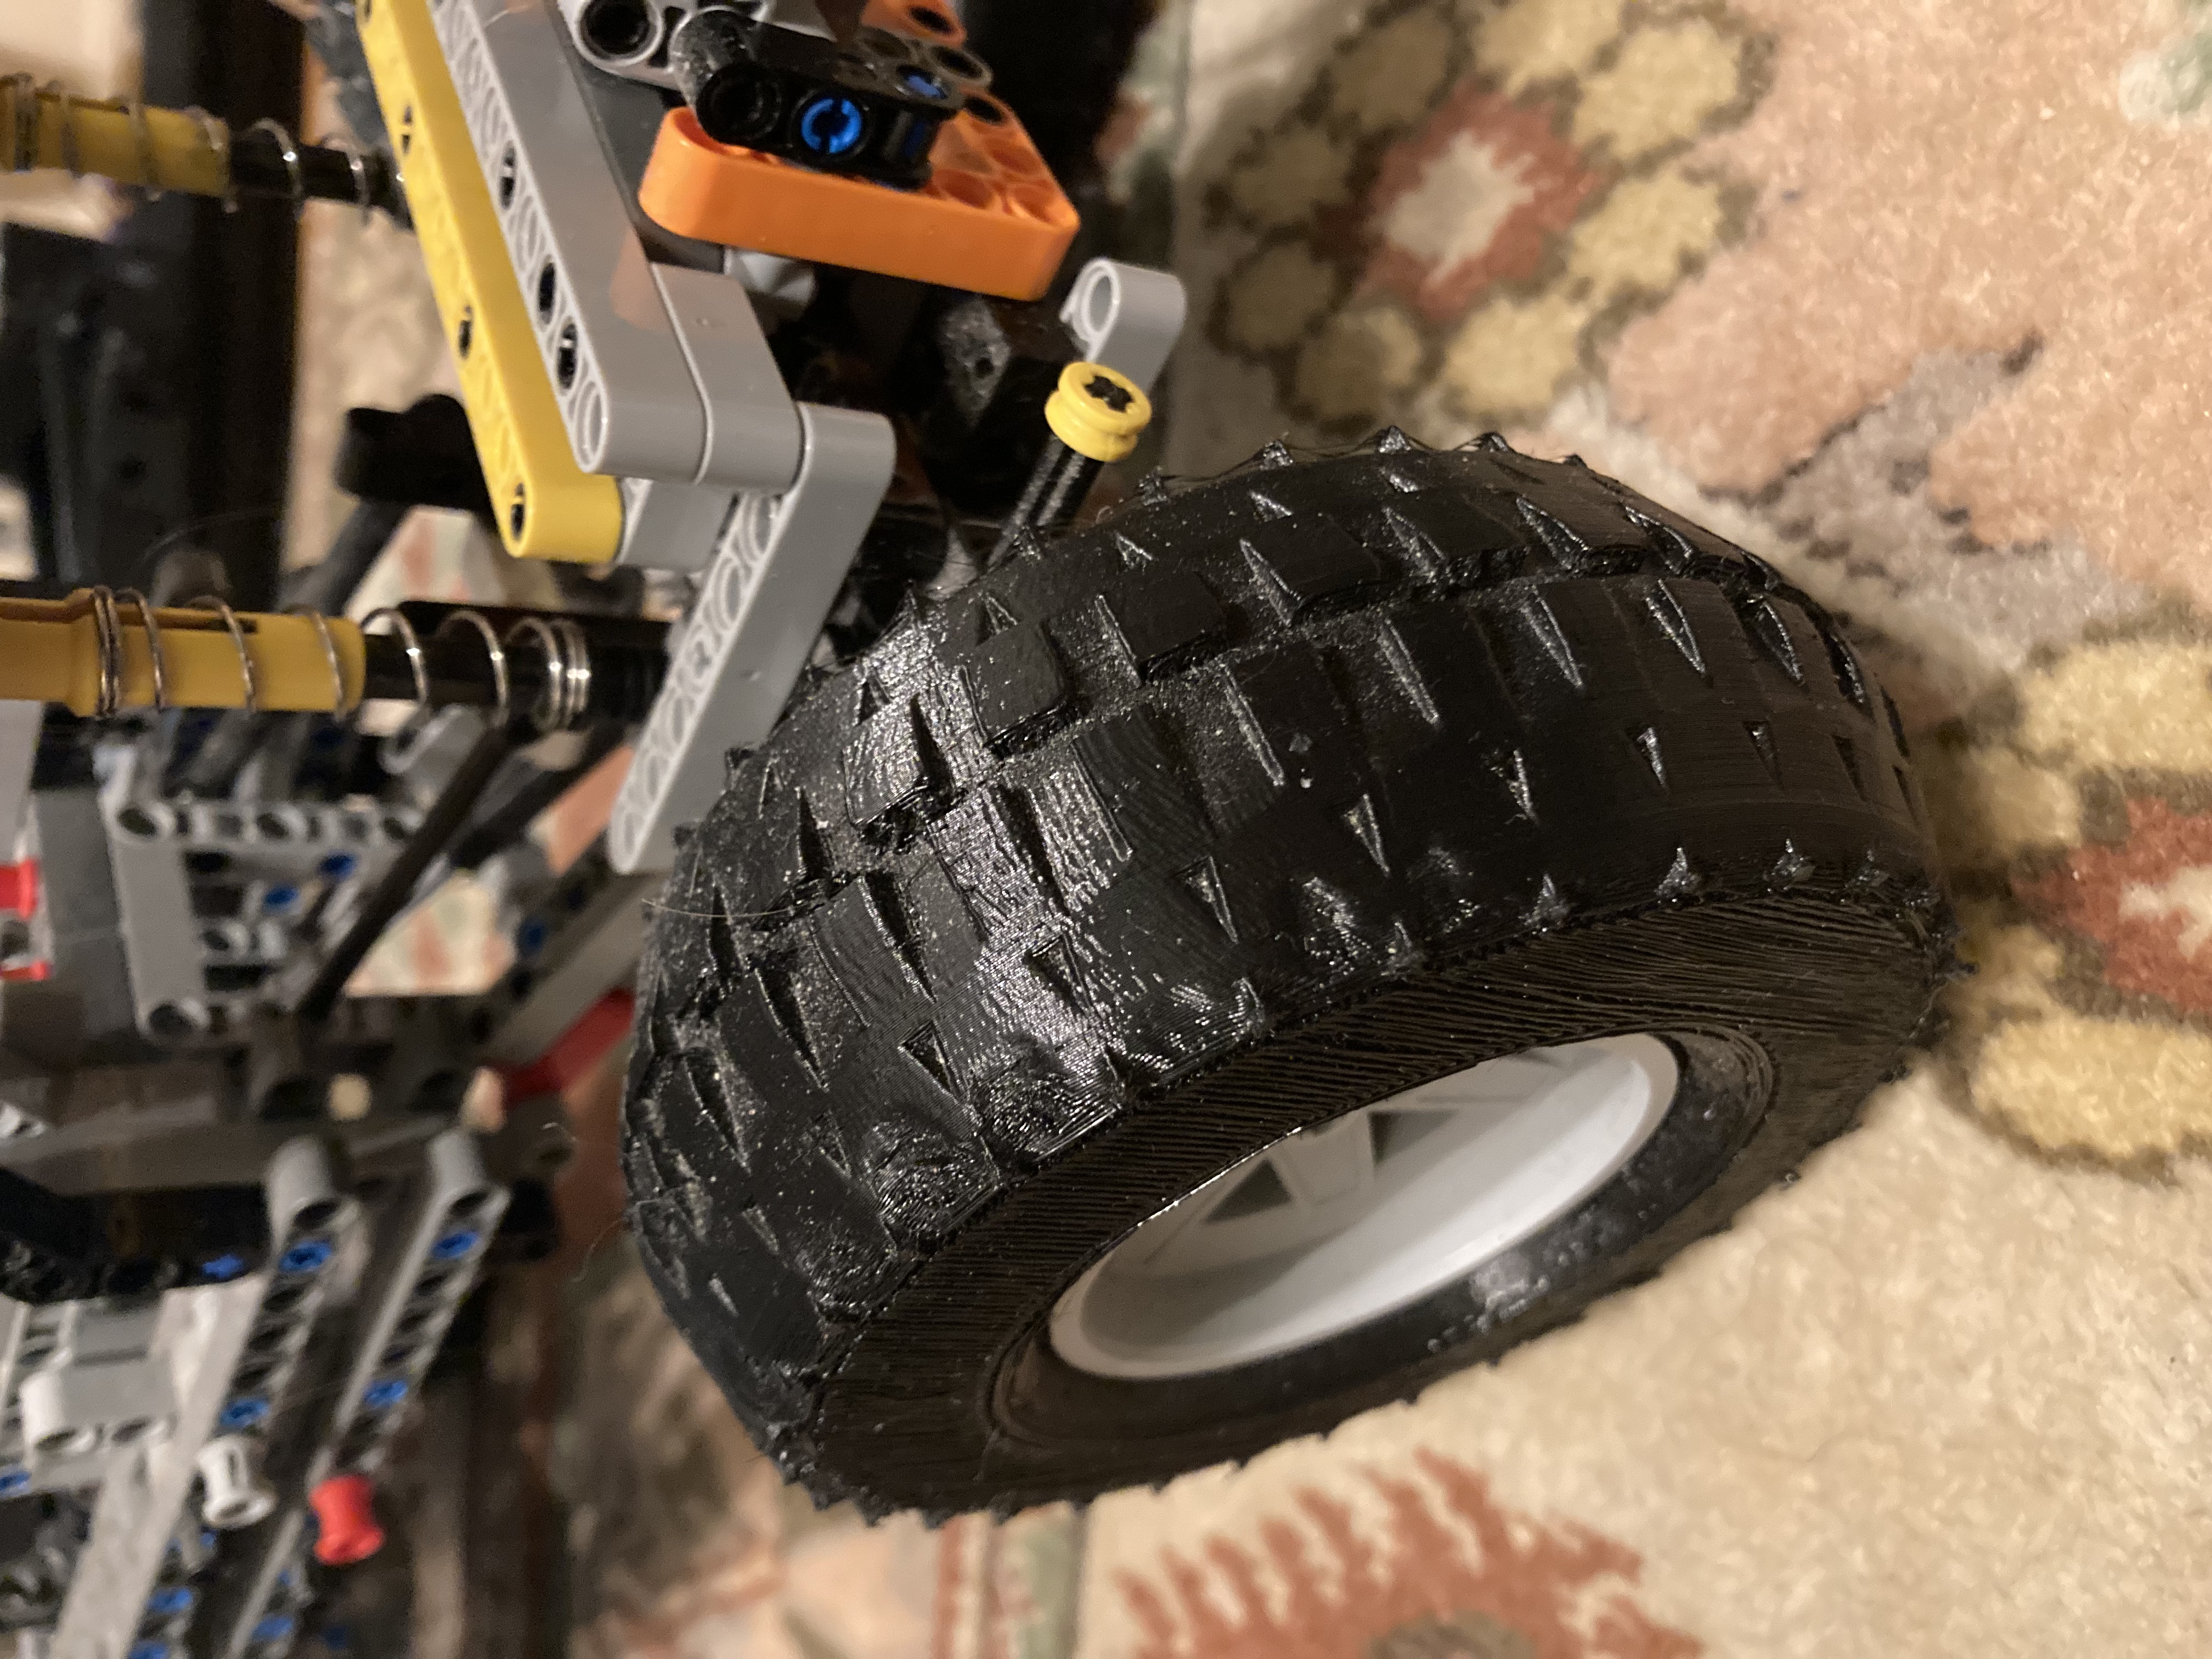 Large off road tire compatible with Lego